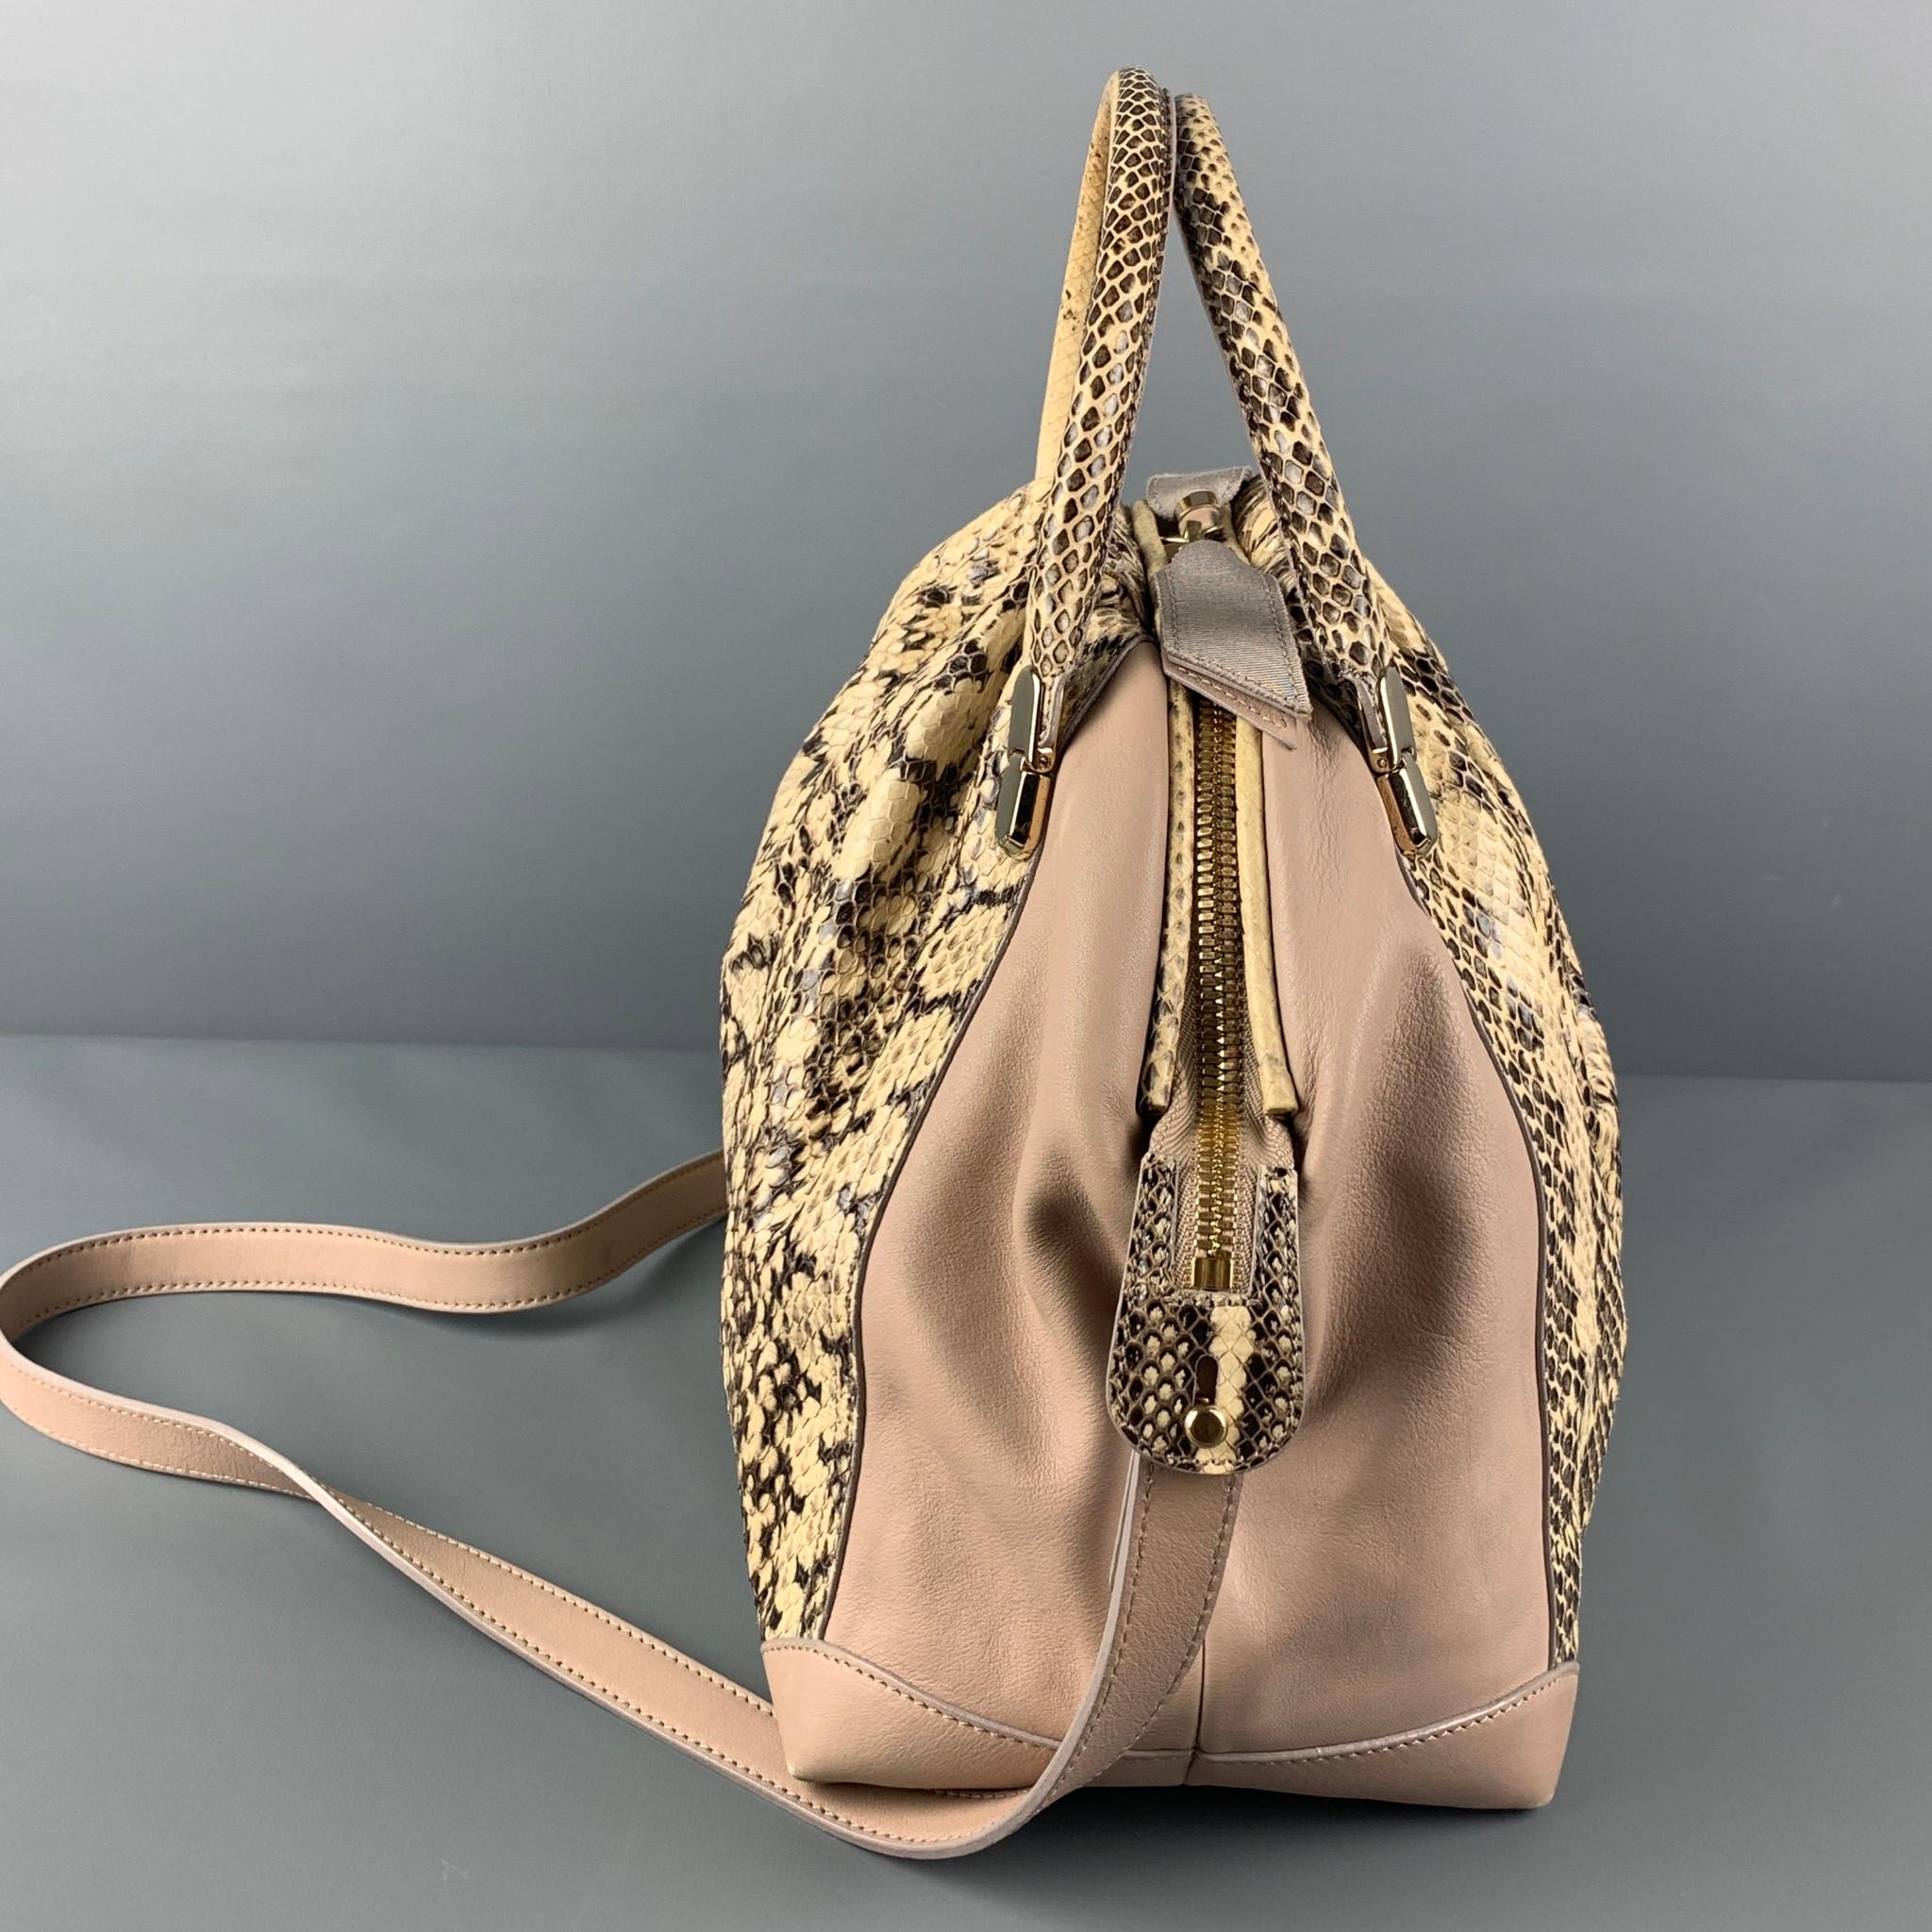 NINA RICCI bag comes in a beige & brown mixed leathers featuring top handles, removable shoulder straps, gold tone hardware, inner pocket, and a zipper closure. Made in Italy. 

Very Good Pre-Owned Condition.
Original Retail Price: